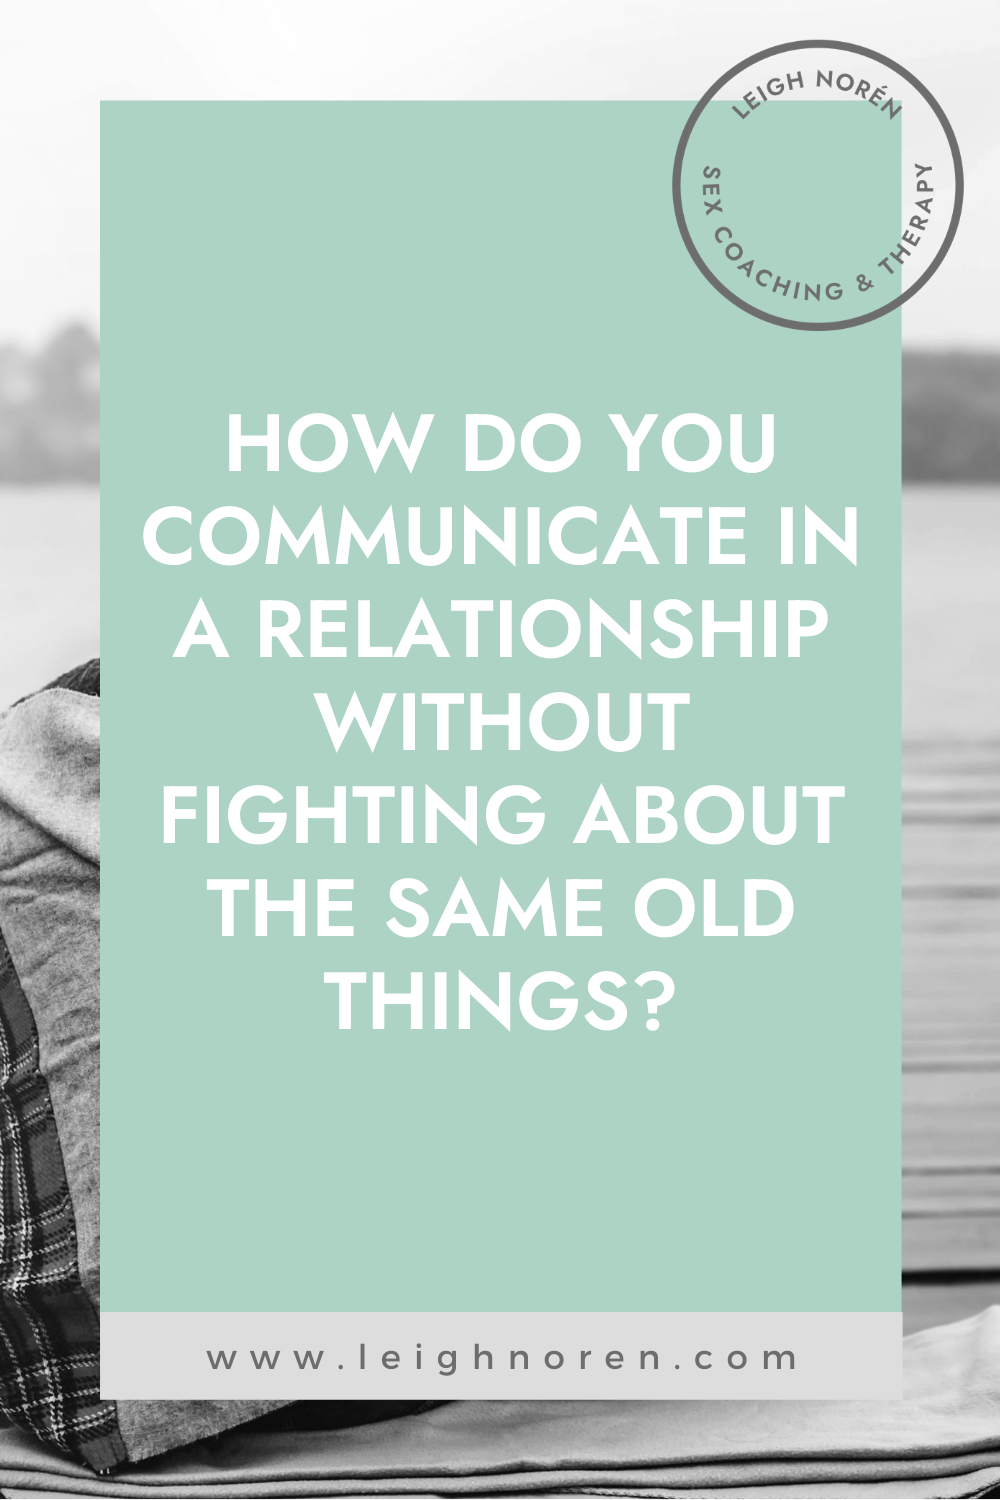 How Do You Communicate In a Relationship Without Fighting About the Same Old Things?